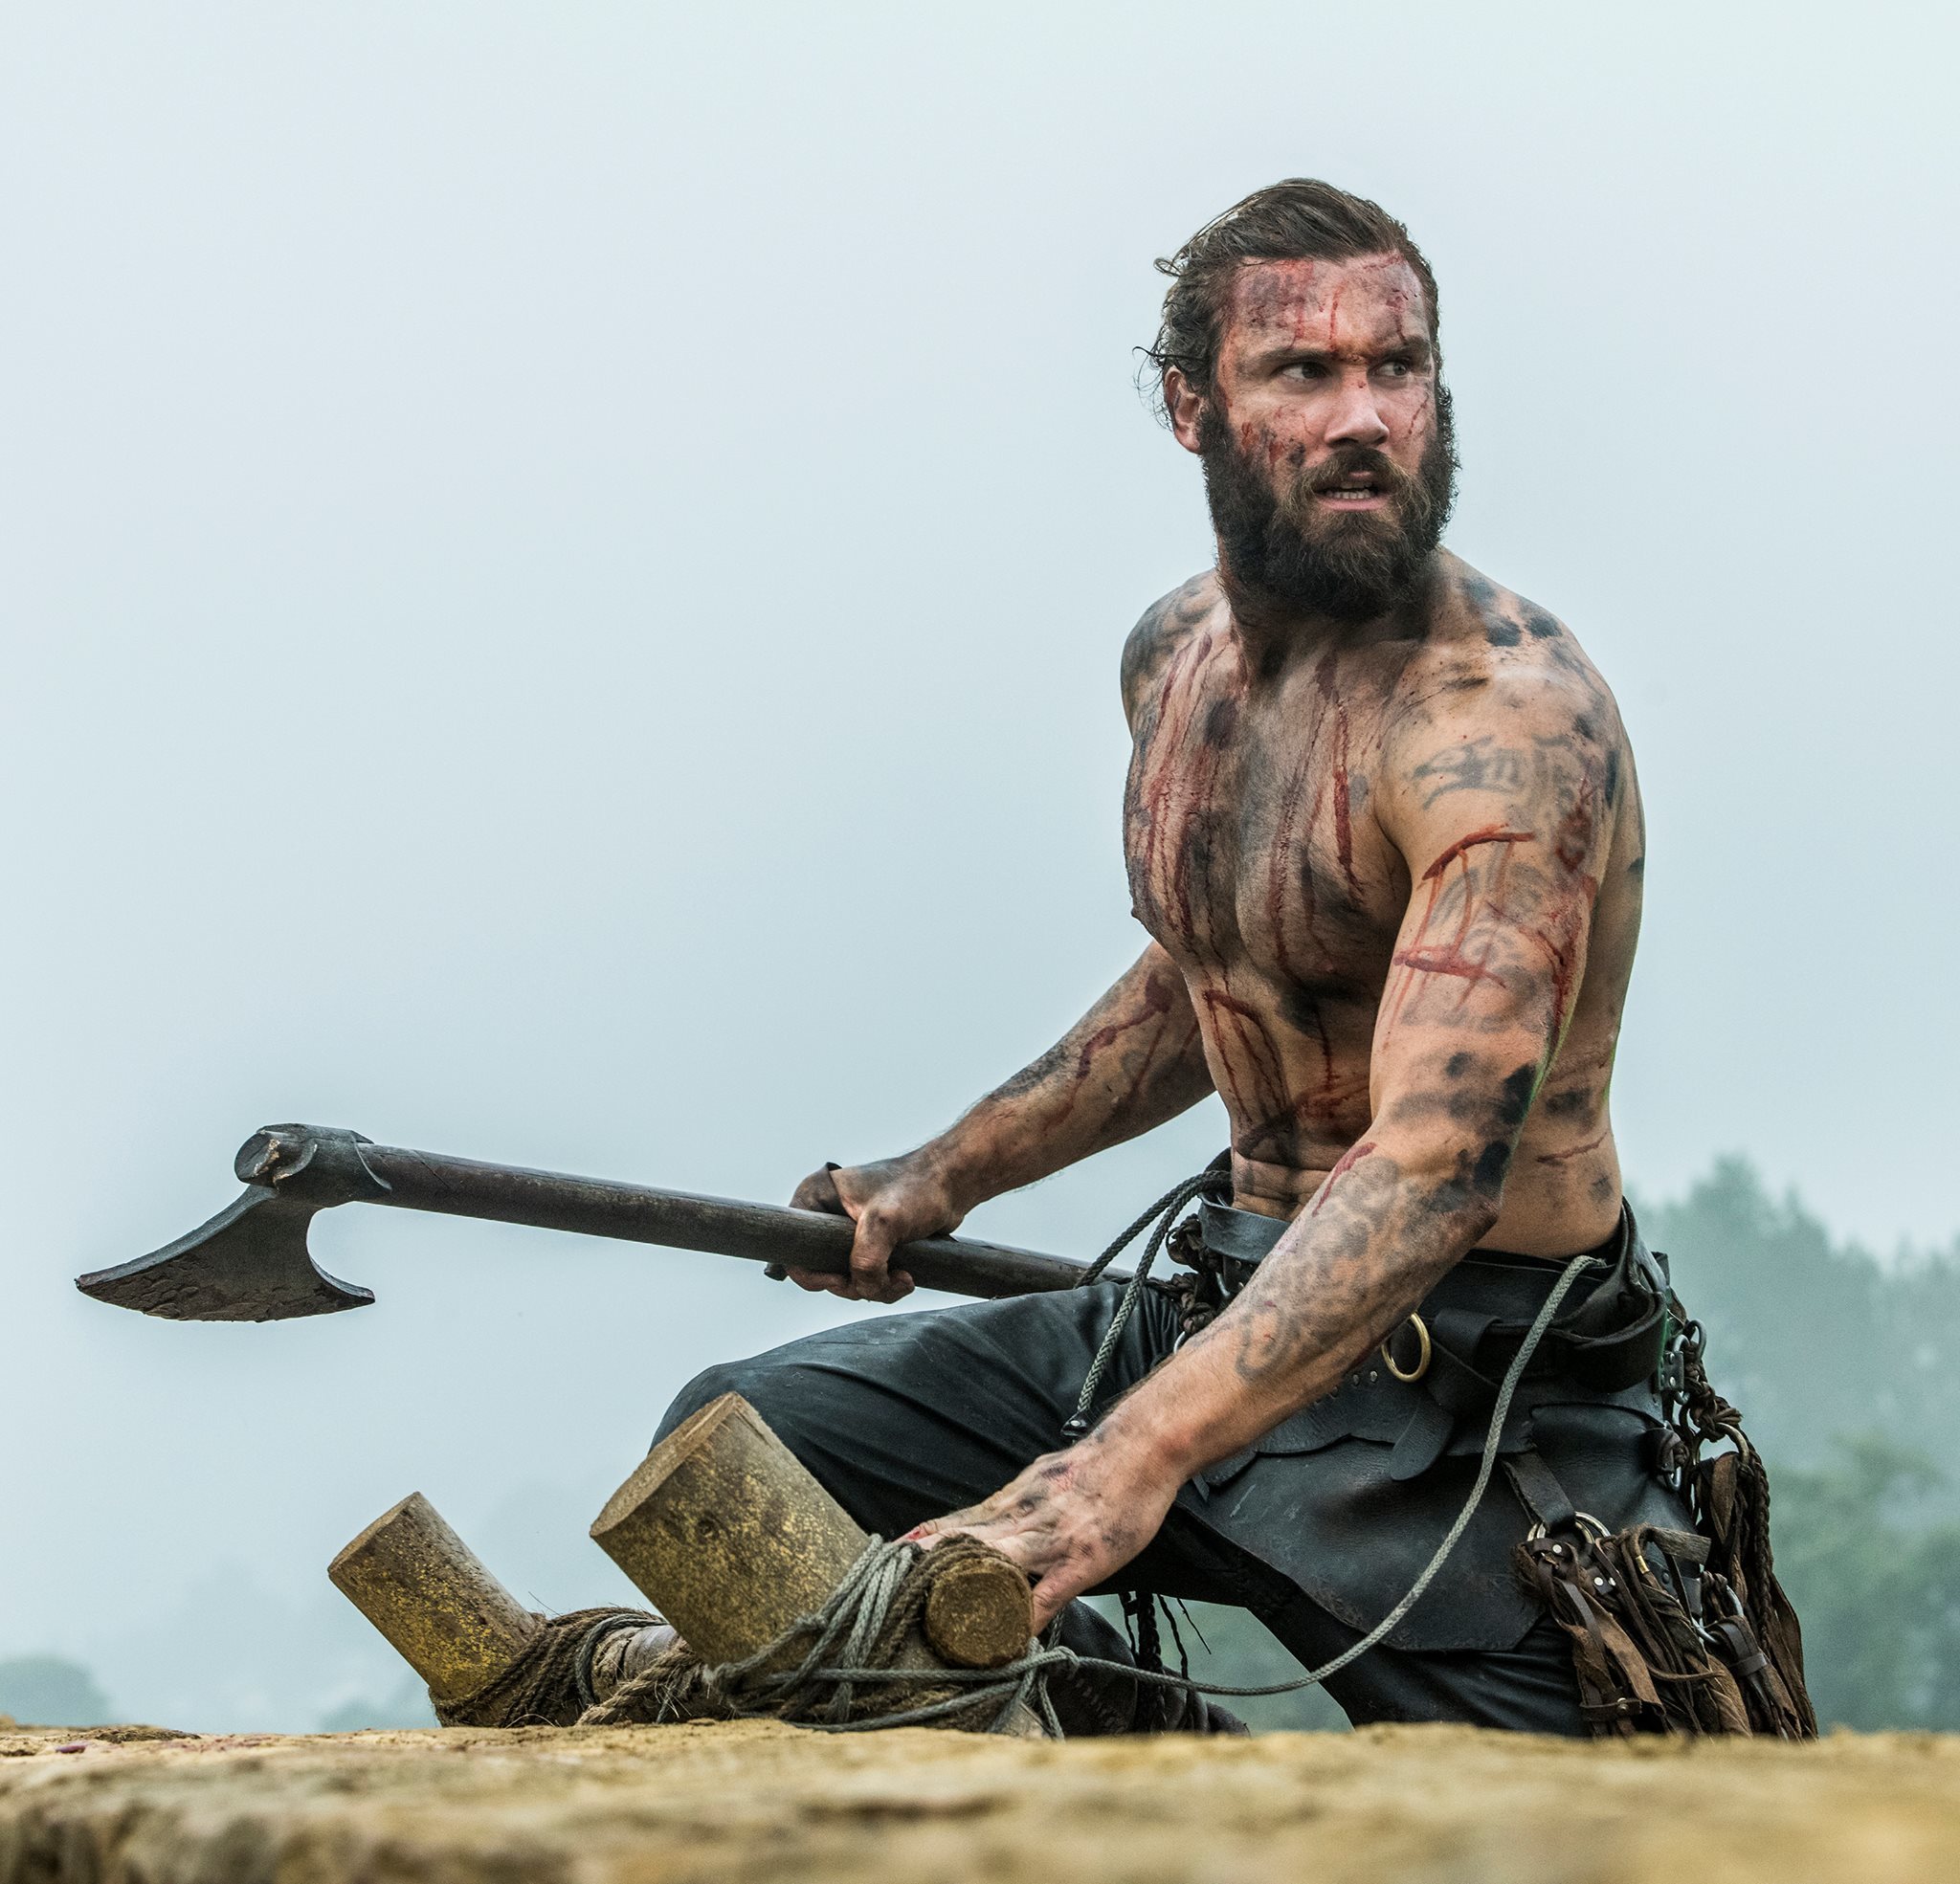 Who are the main characters in the History Channel's Vikings series?